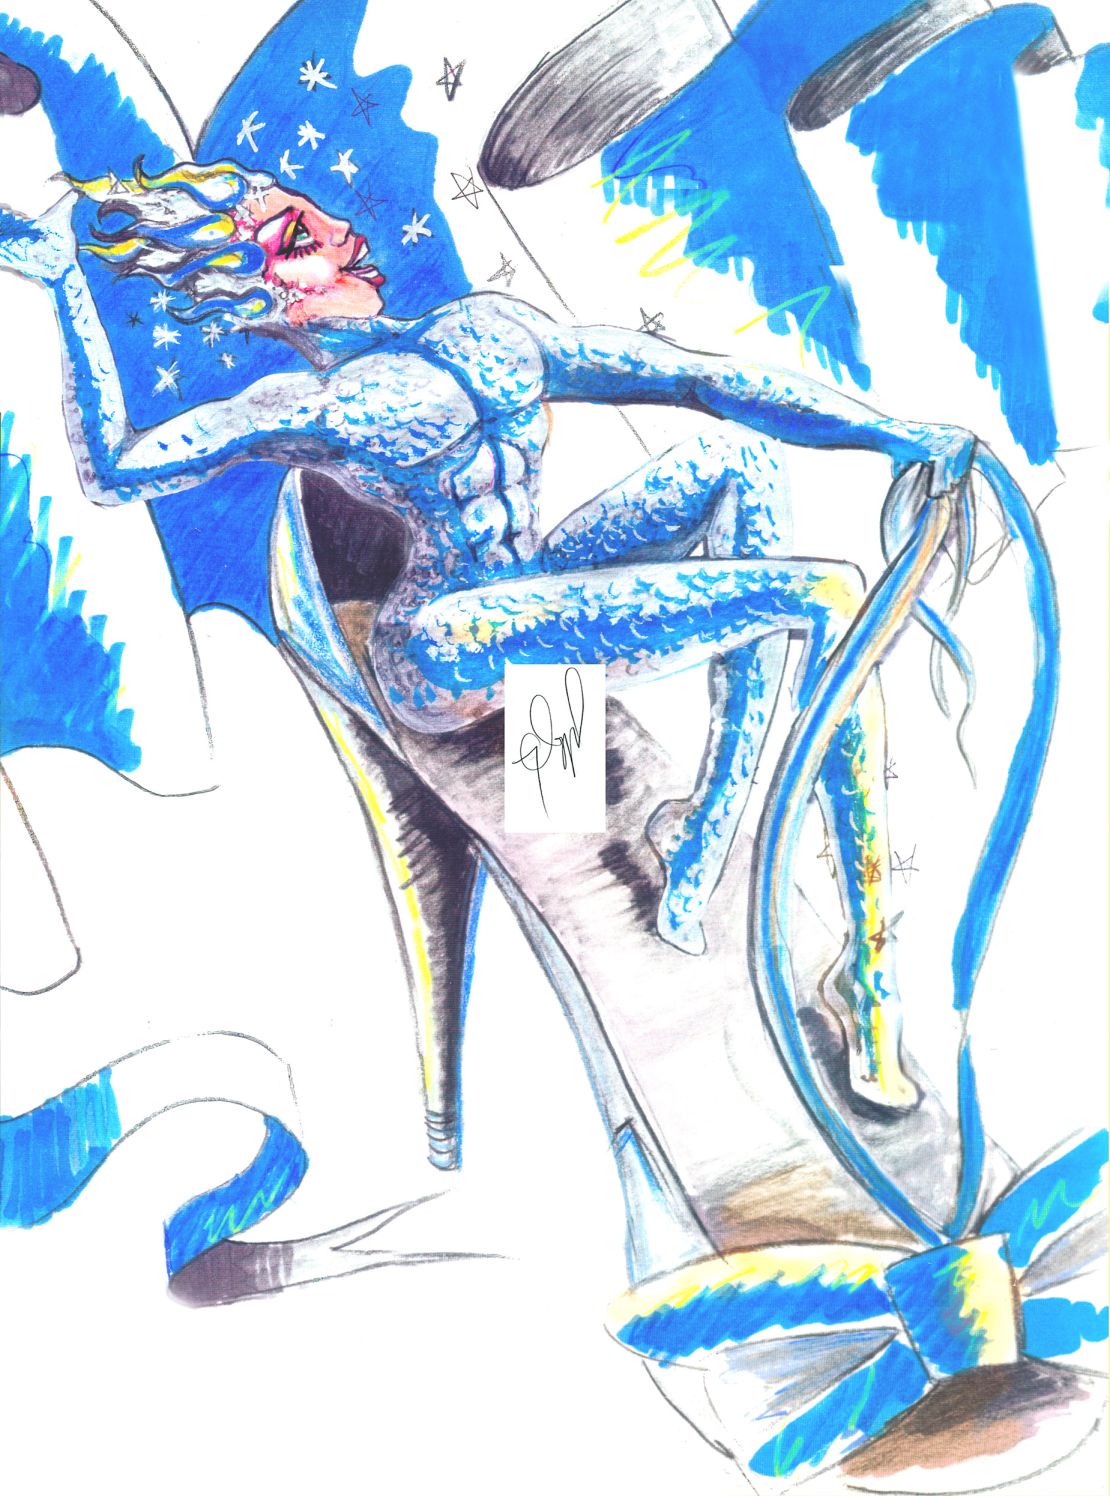 Tim Chappel's original sketch for Felicia Jollygoodfellow's bustop opera costume ended up as the exaggerated silver look that became legendary.